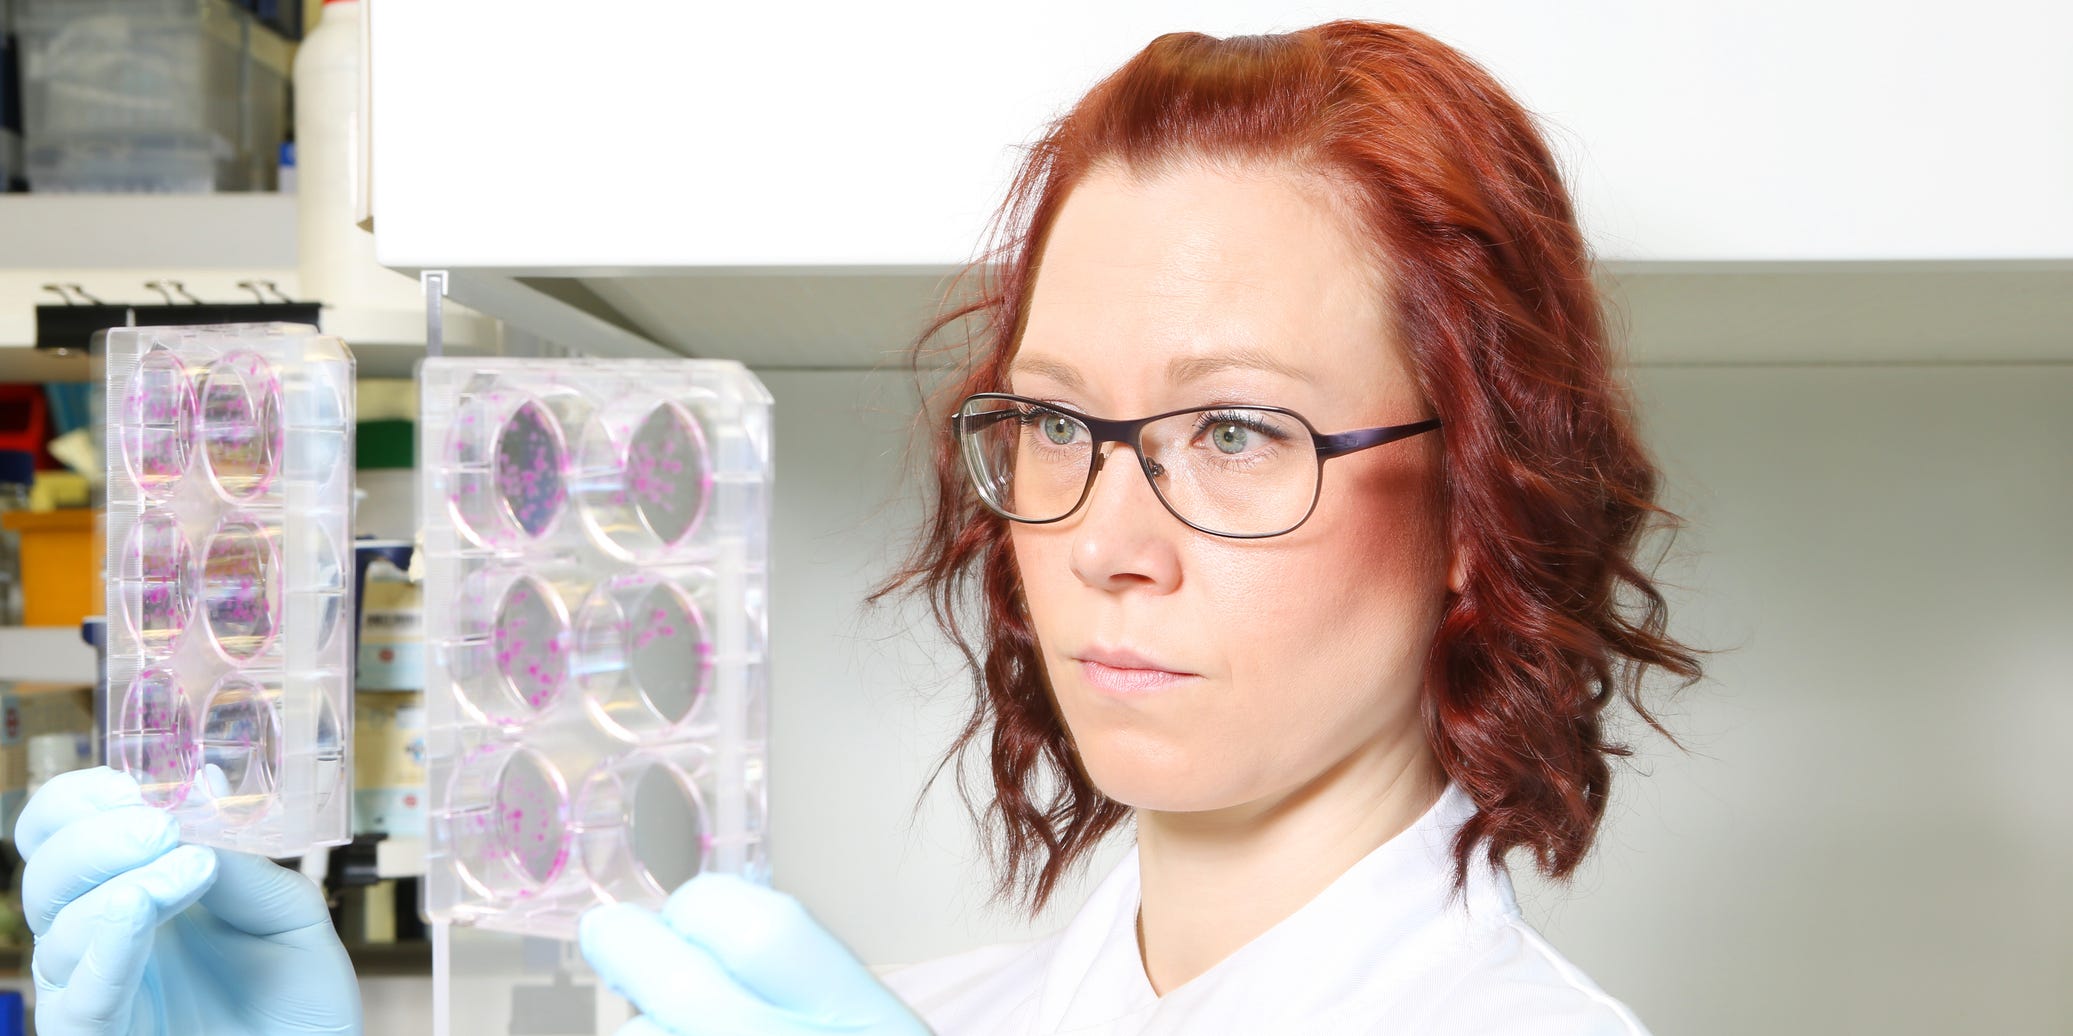 A red haired woman in a lab coat and glasses holds up two petri dishes, looking at them quizically.